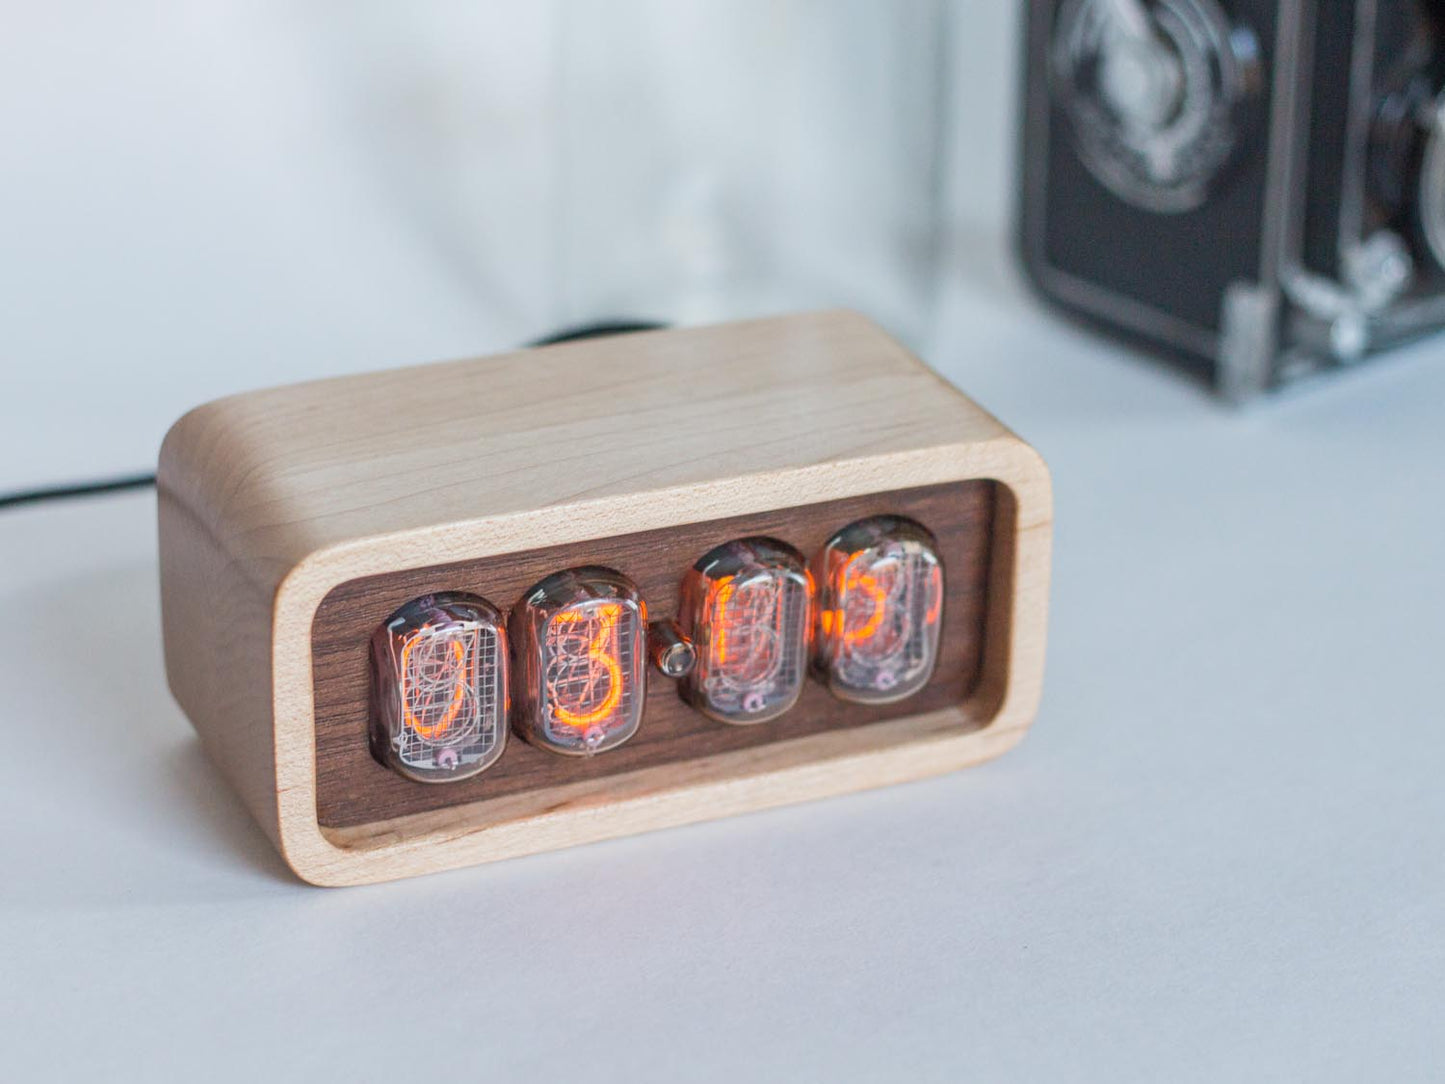 Clock sits on counter table made from solid maplewith a contrasting walnut face. The design uses retro Nixie tubes for a warm orange glow.